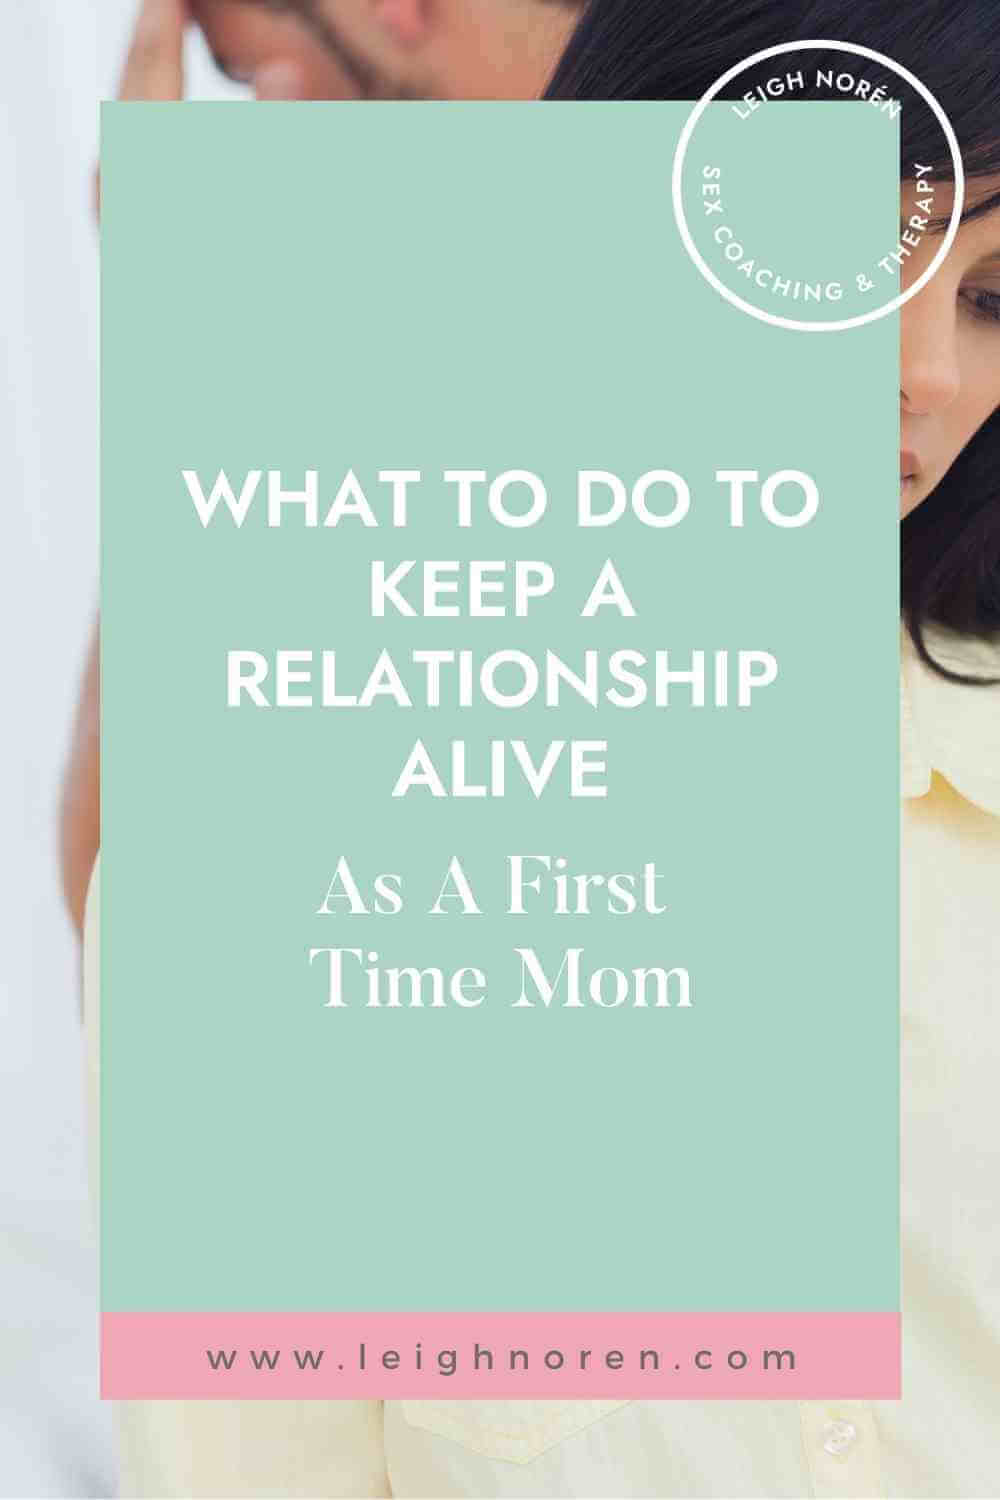 What To Do To Keep A Relationship Alive As A First-Time Mom